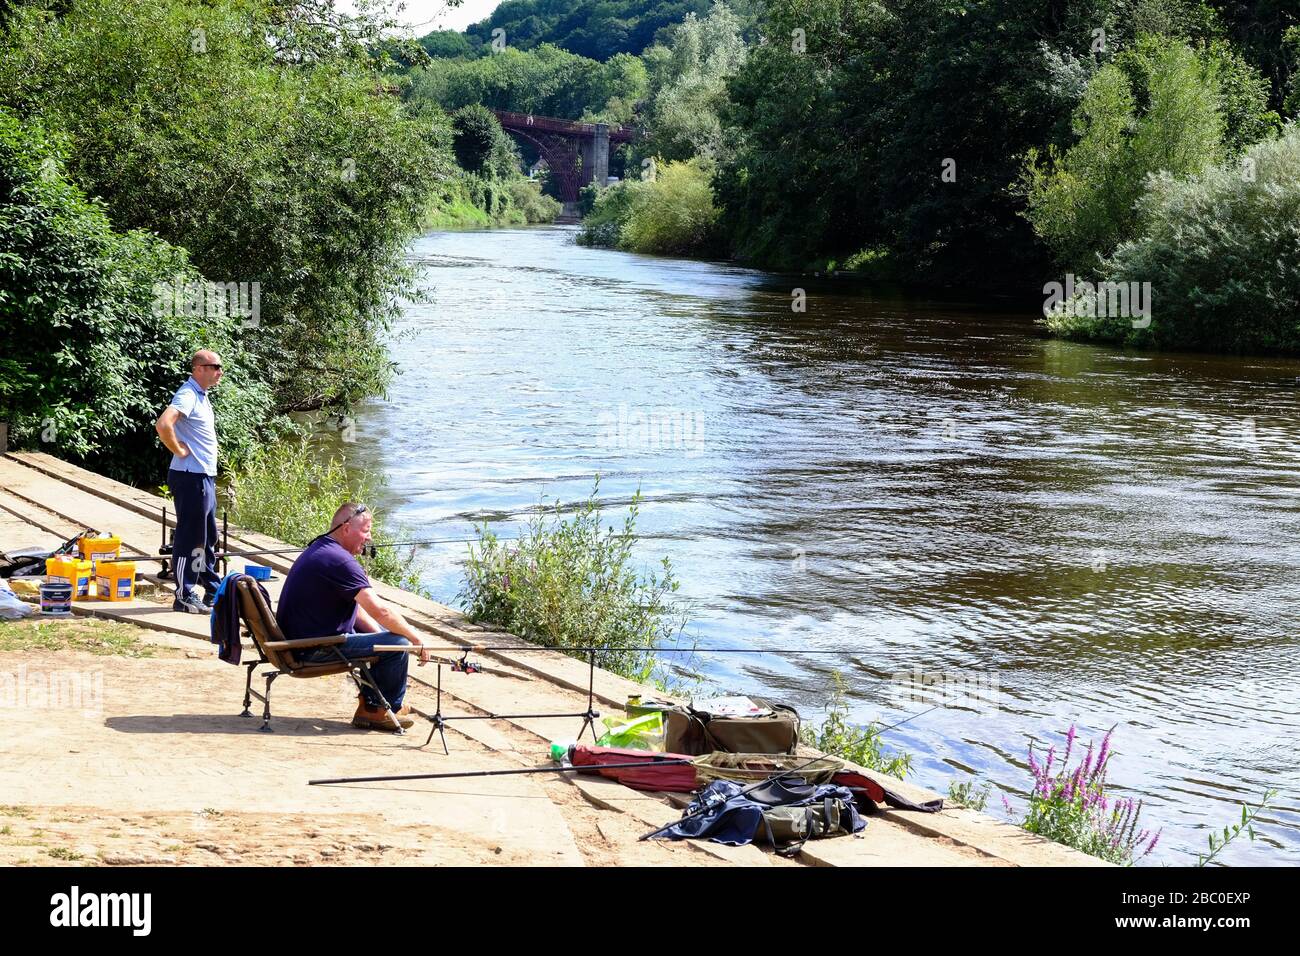 Two men fishing on the River Severn downstream from the famous Iron Bridge in Shropshire, UK Stock Photo